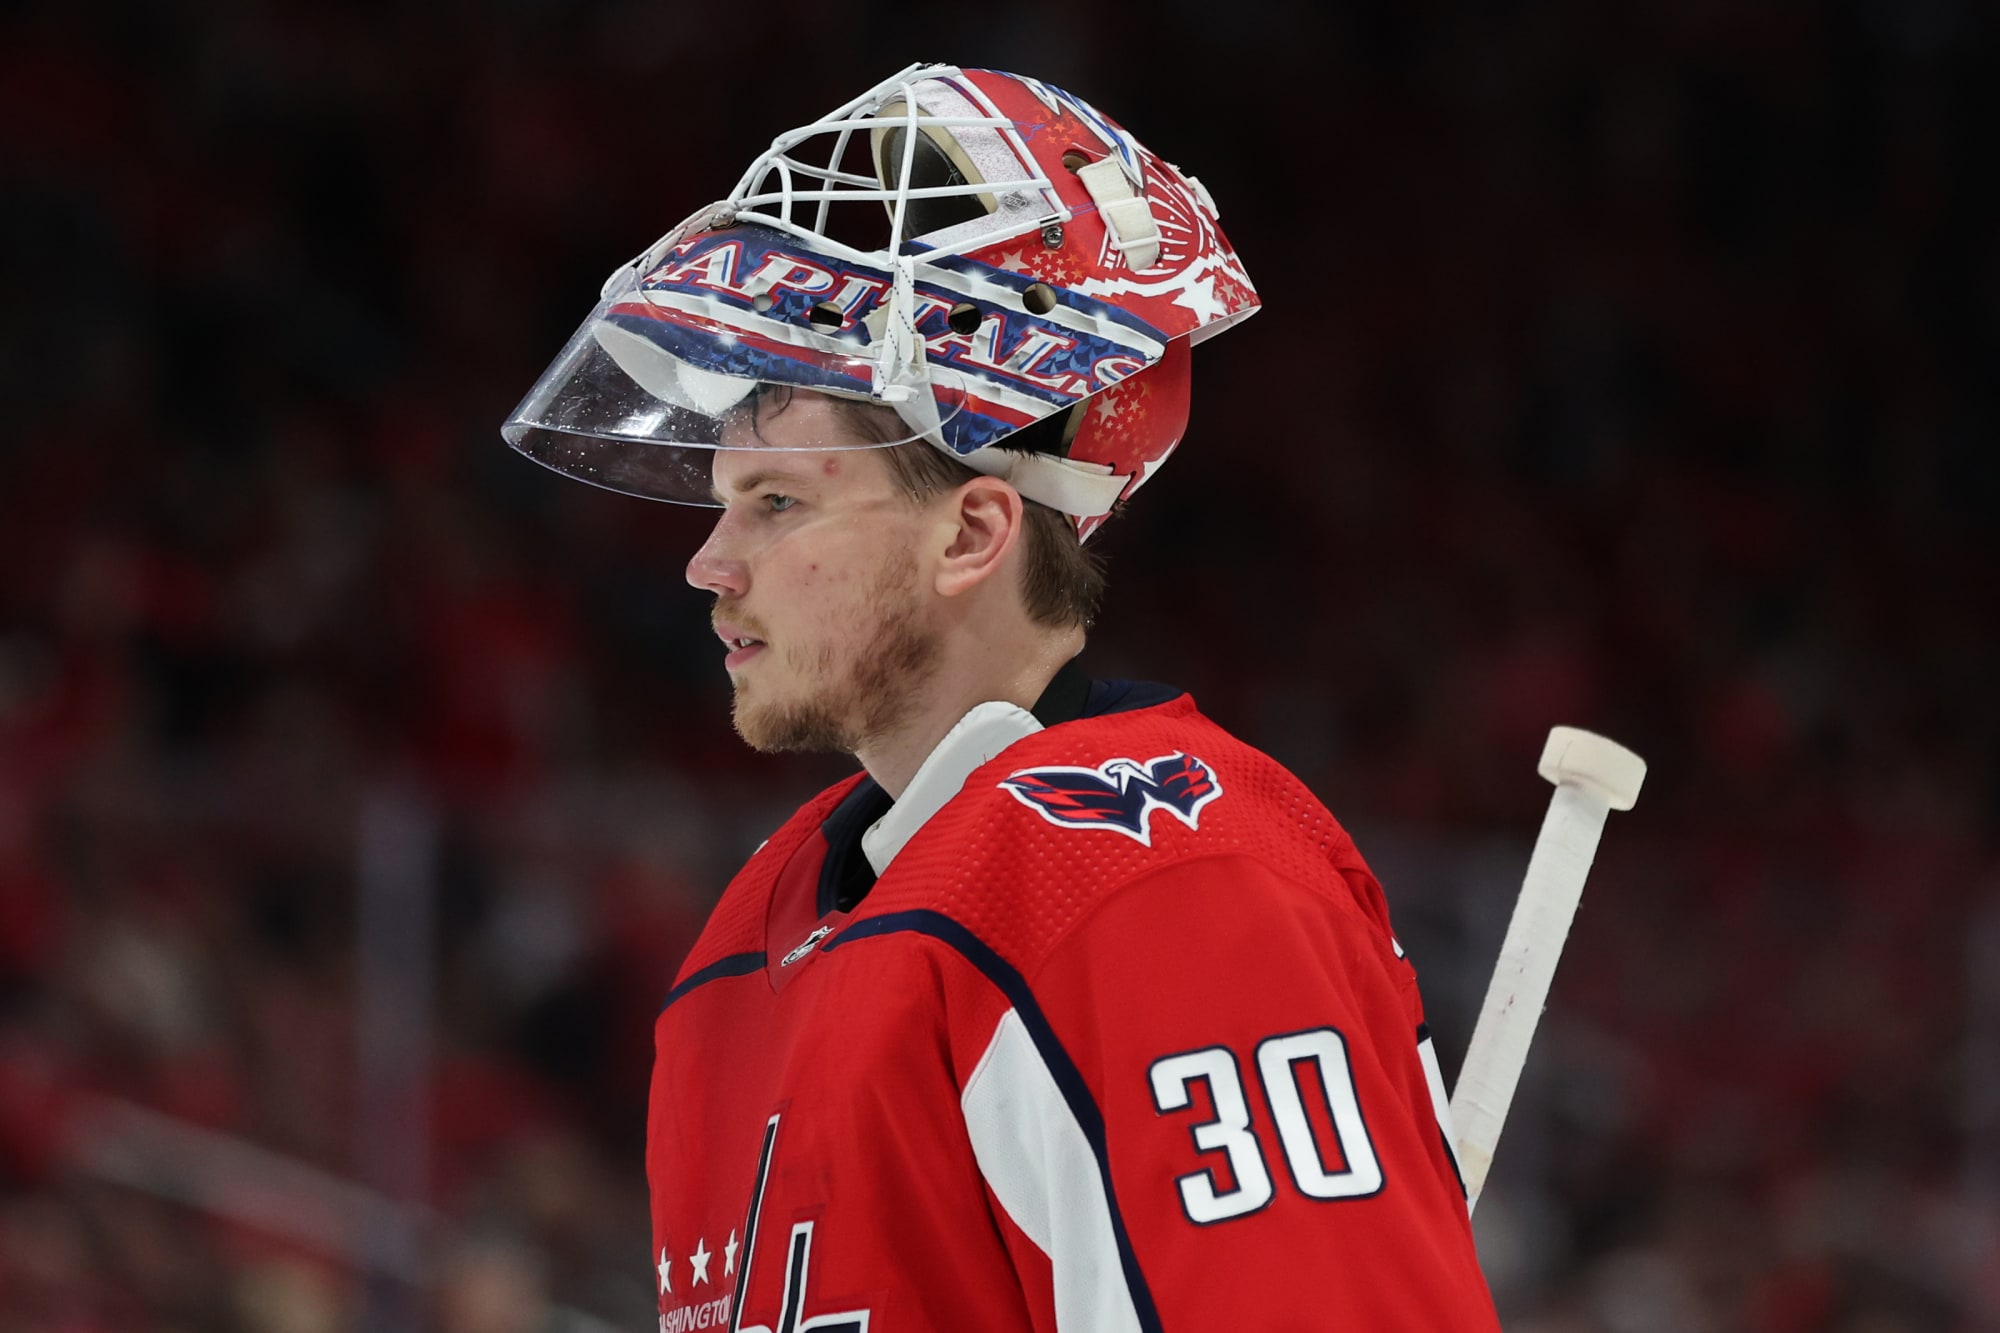 Showdown with Sammy: Ilya Samsonov To Make His Maple Leafs Debut Against  the Capitals on October 13